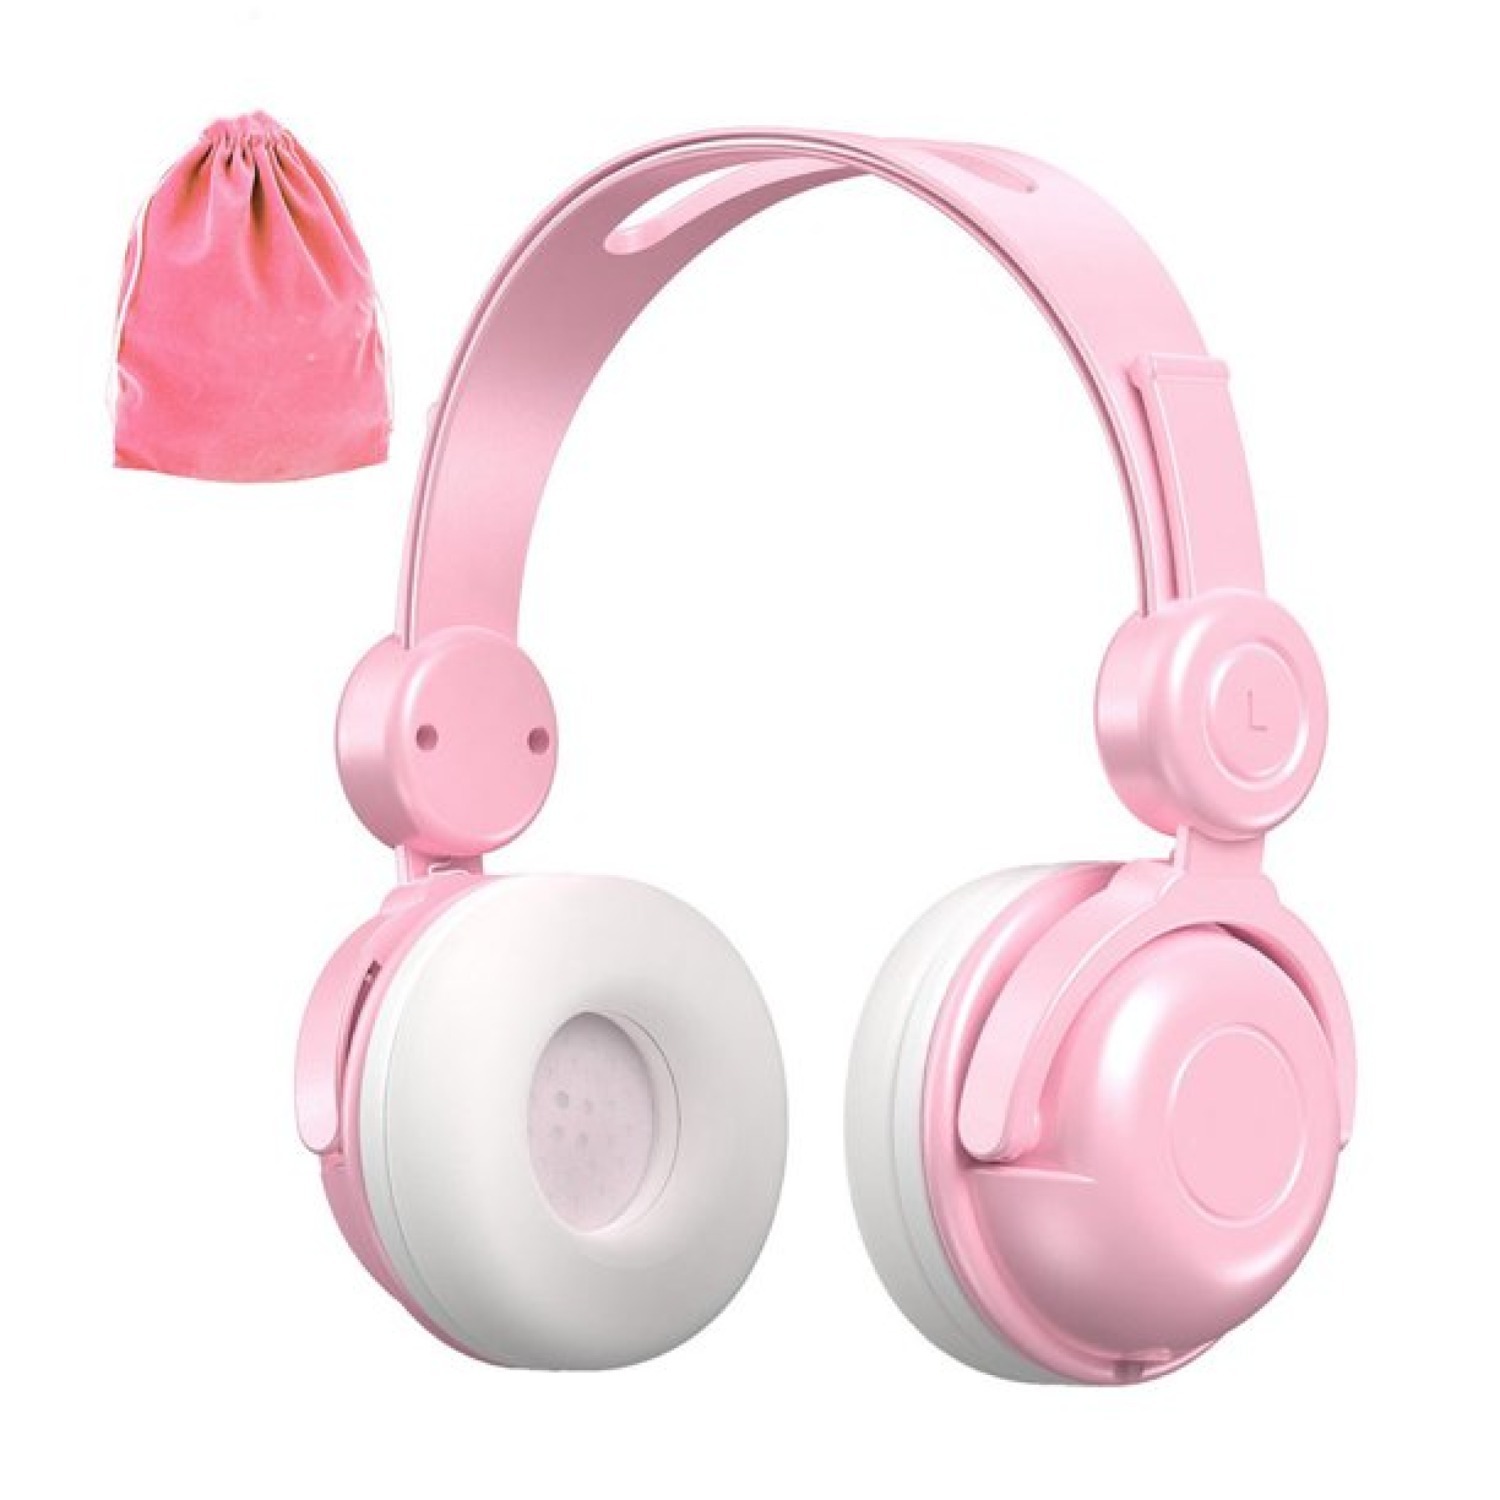 Vogek Wired On-Ear Kids Headphones with Microphone $9 Free S&H